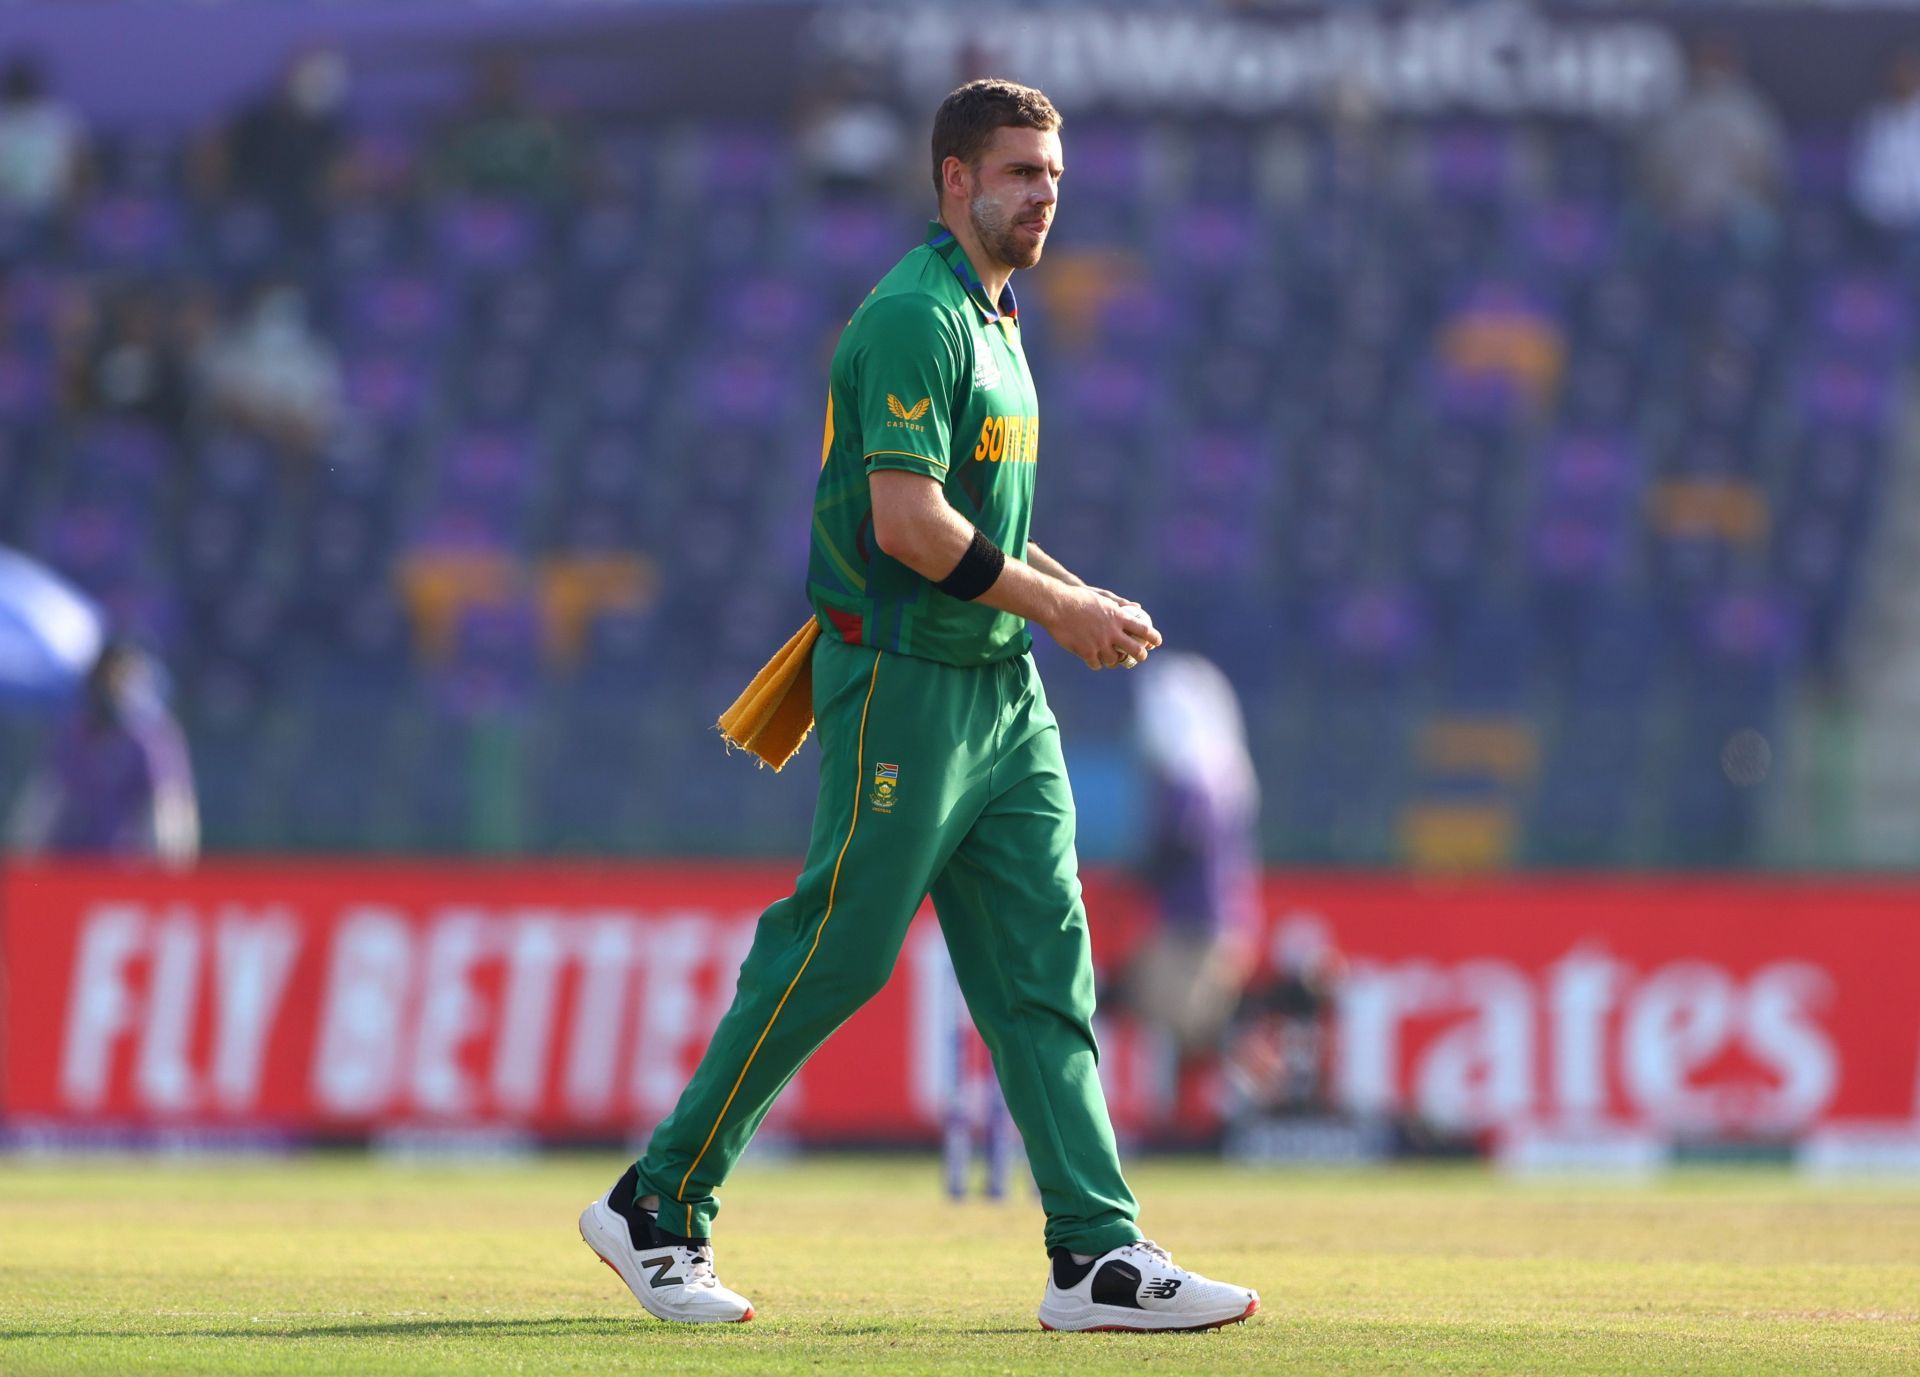 Anrich Nortje in action for South Africa at the T20 World Cup 2021.